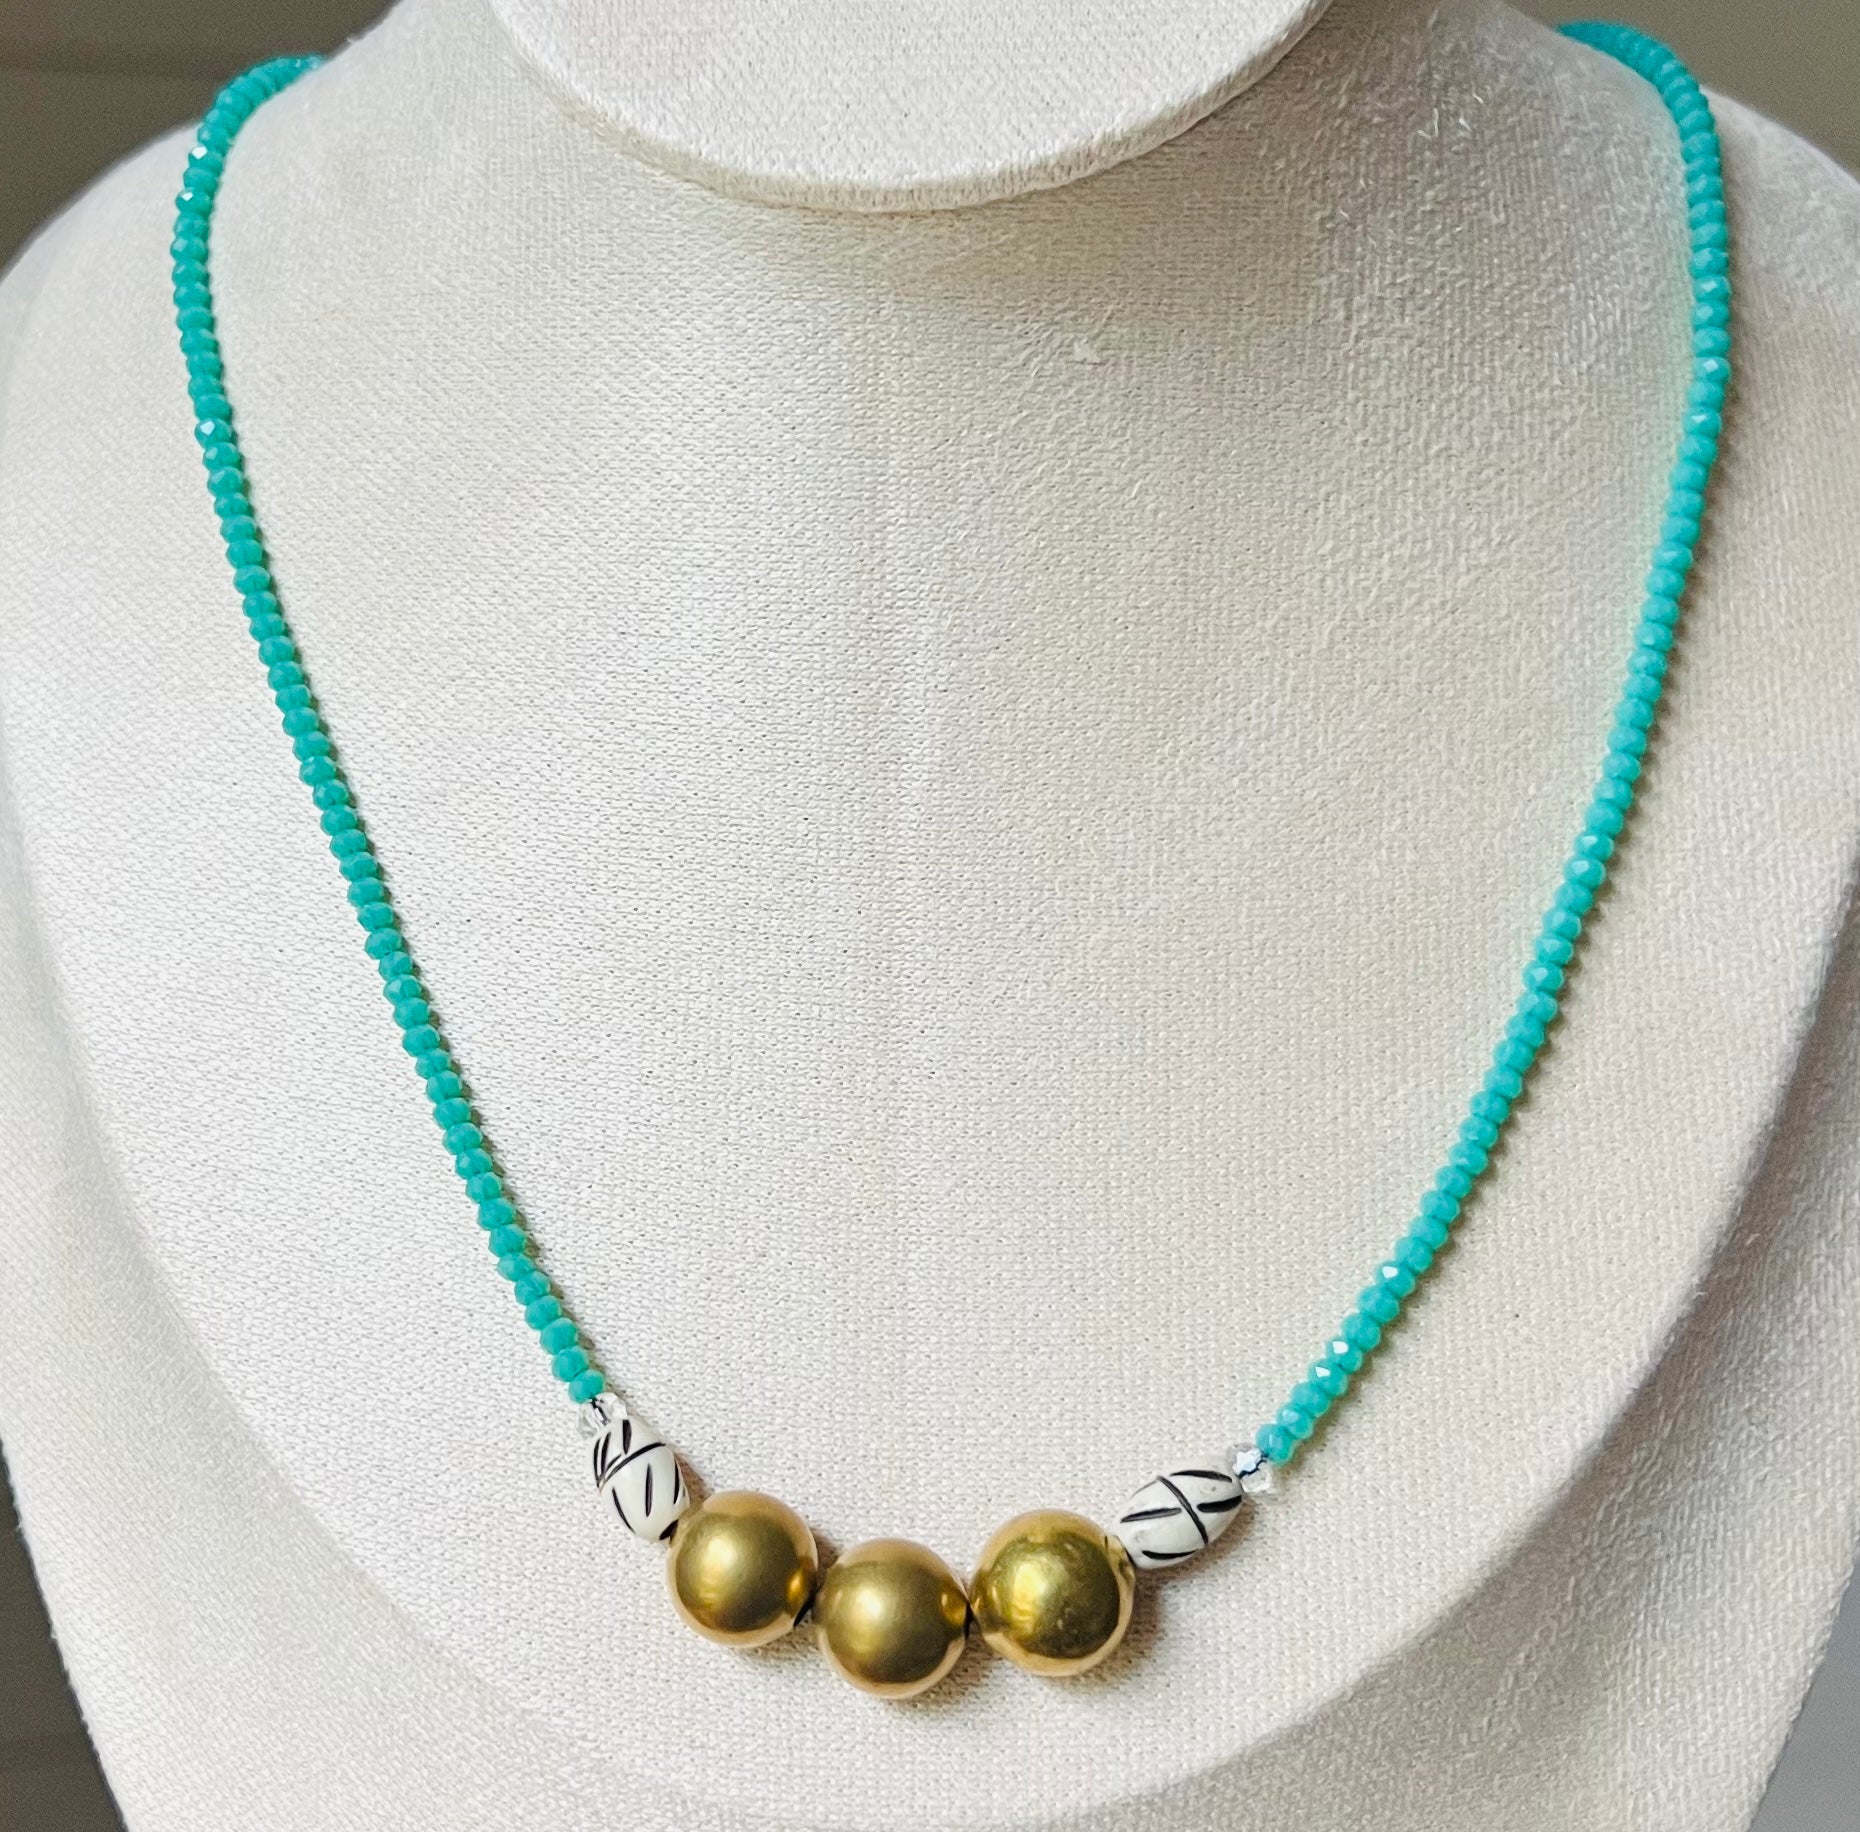 Brass on Turquoise